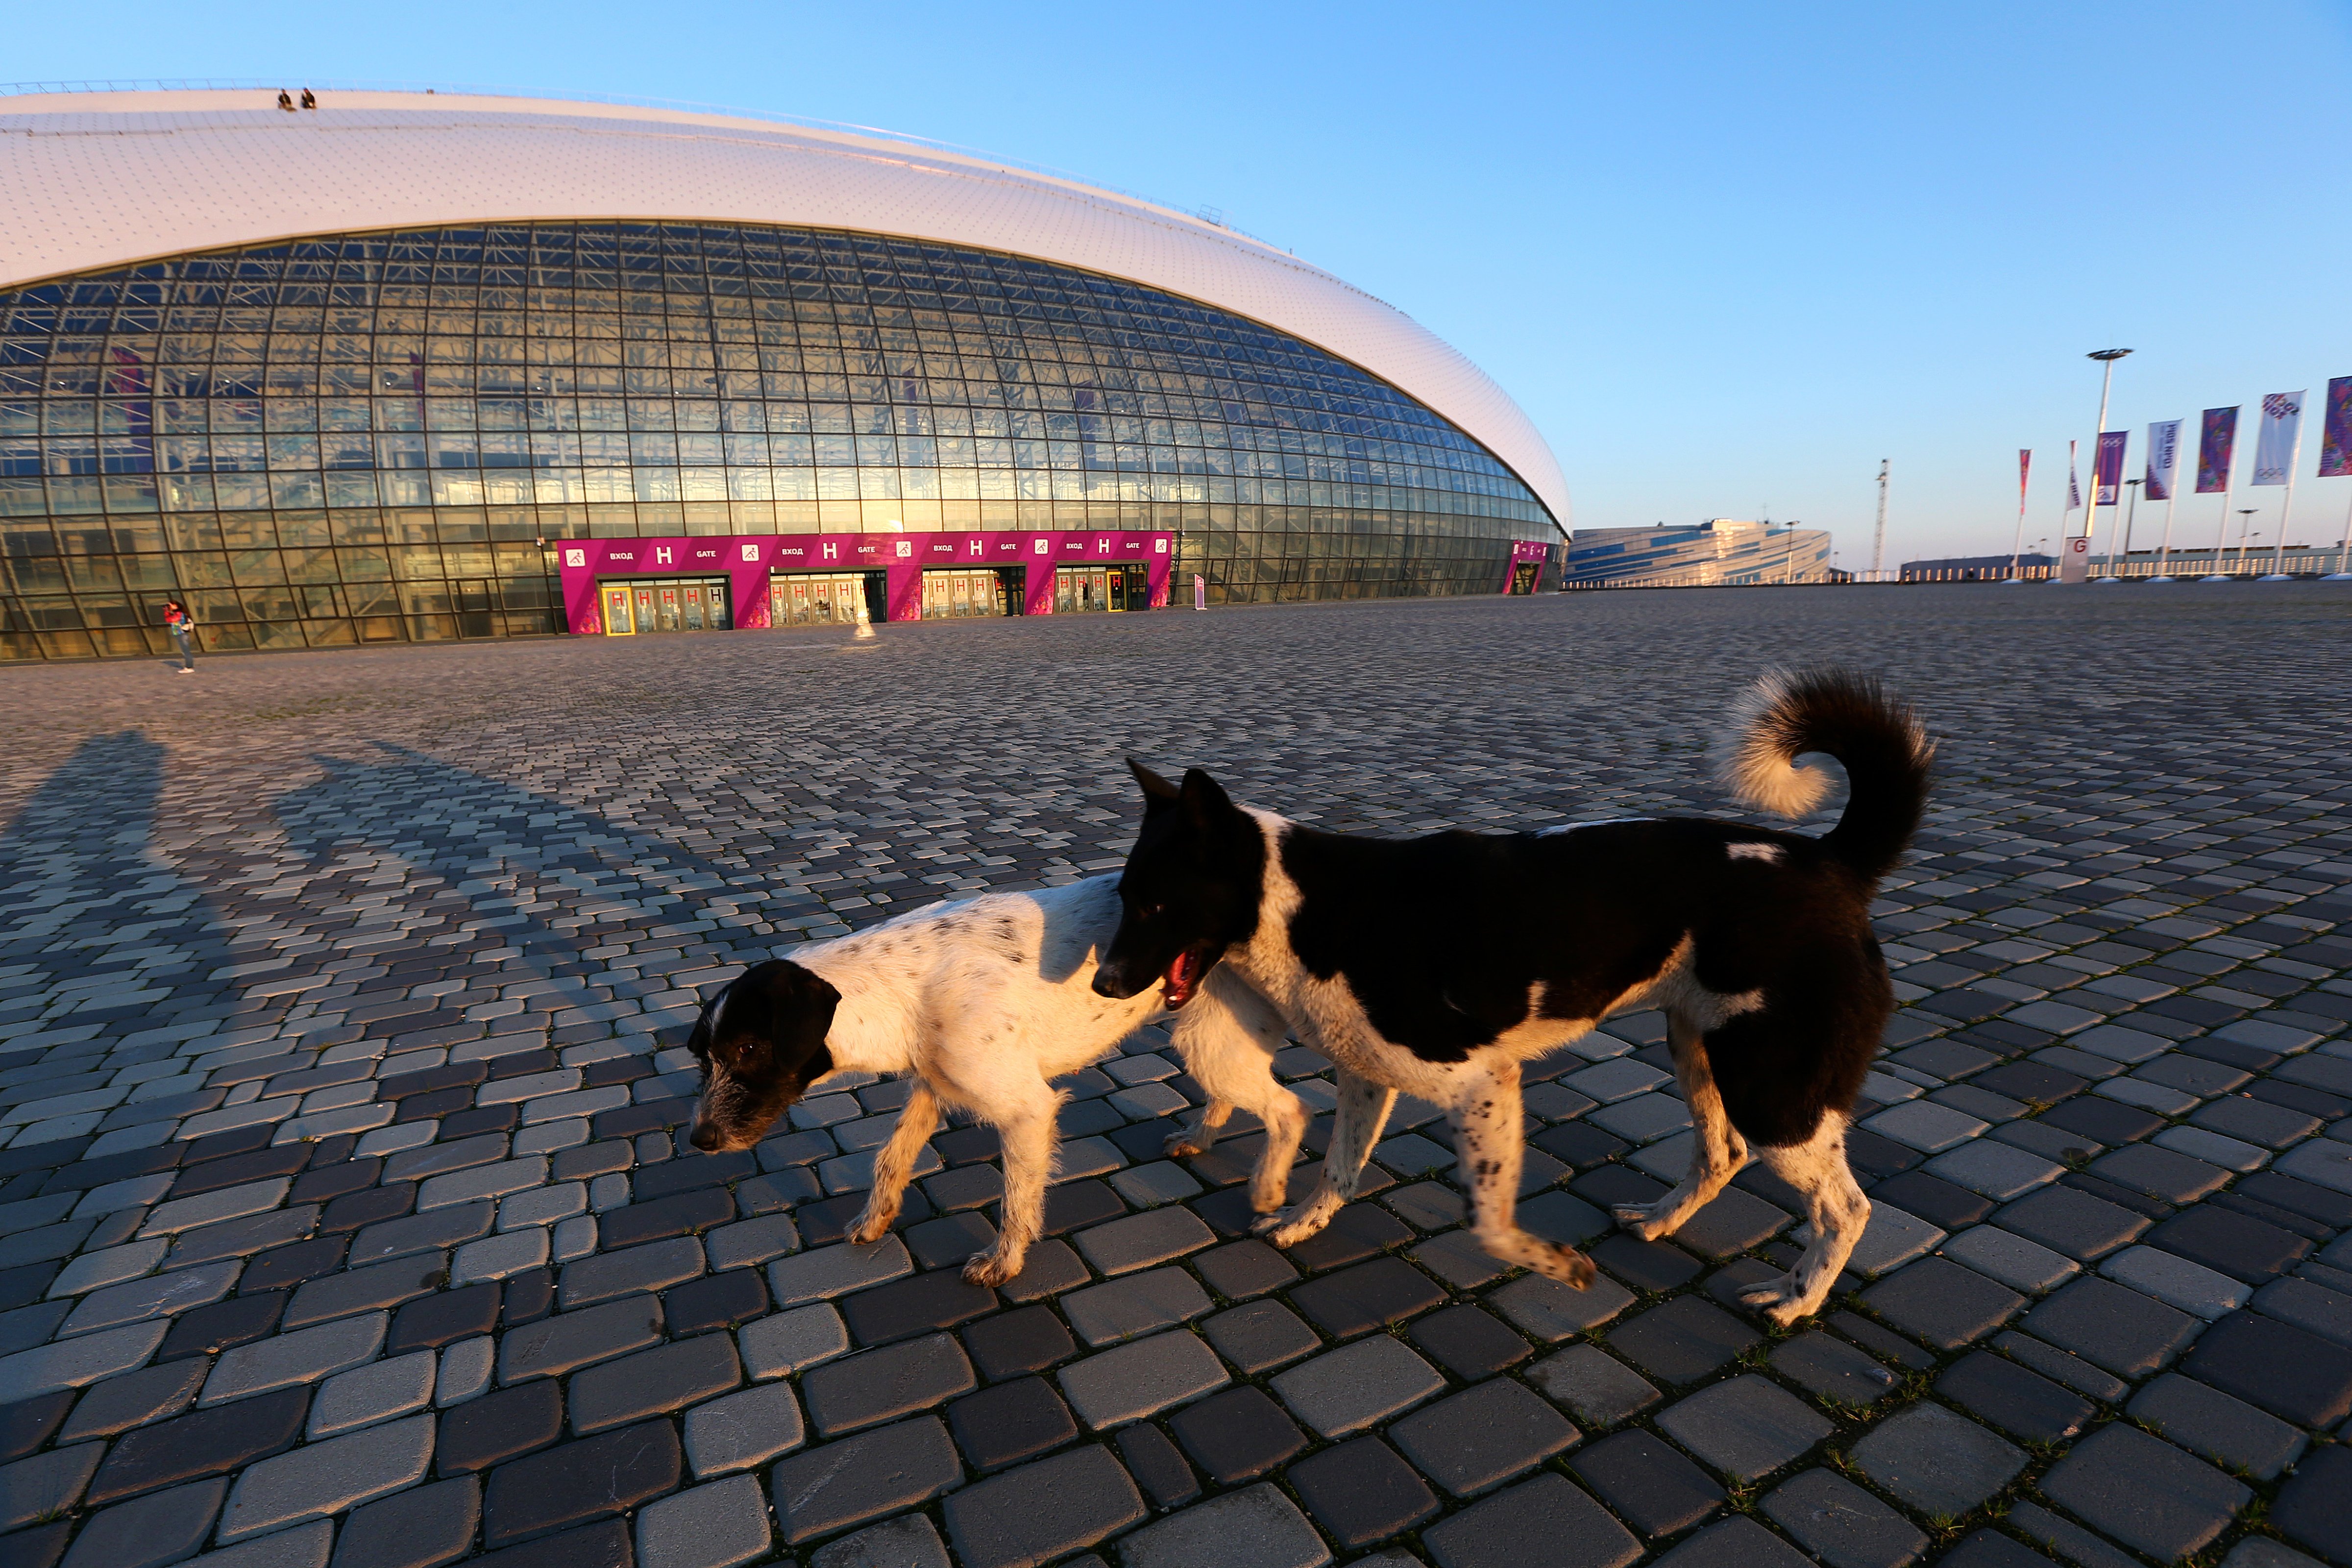 Stray dogs walk in front of the Bolshoy Ice Dome ahead of the Sochi 2014 Winter Olympics on February 2, 2014 in Sochi, Russia. (Quinn Rooney / Getty Images)